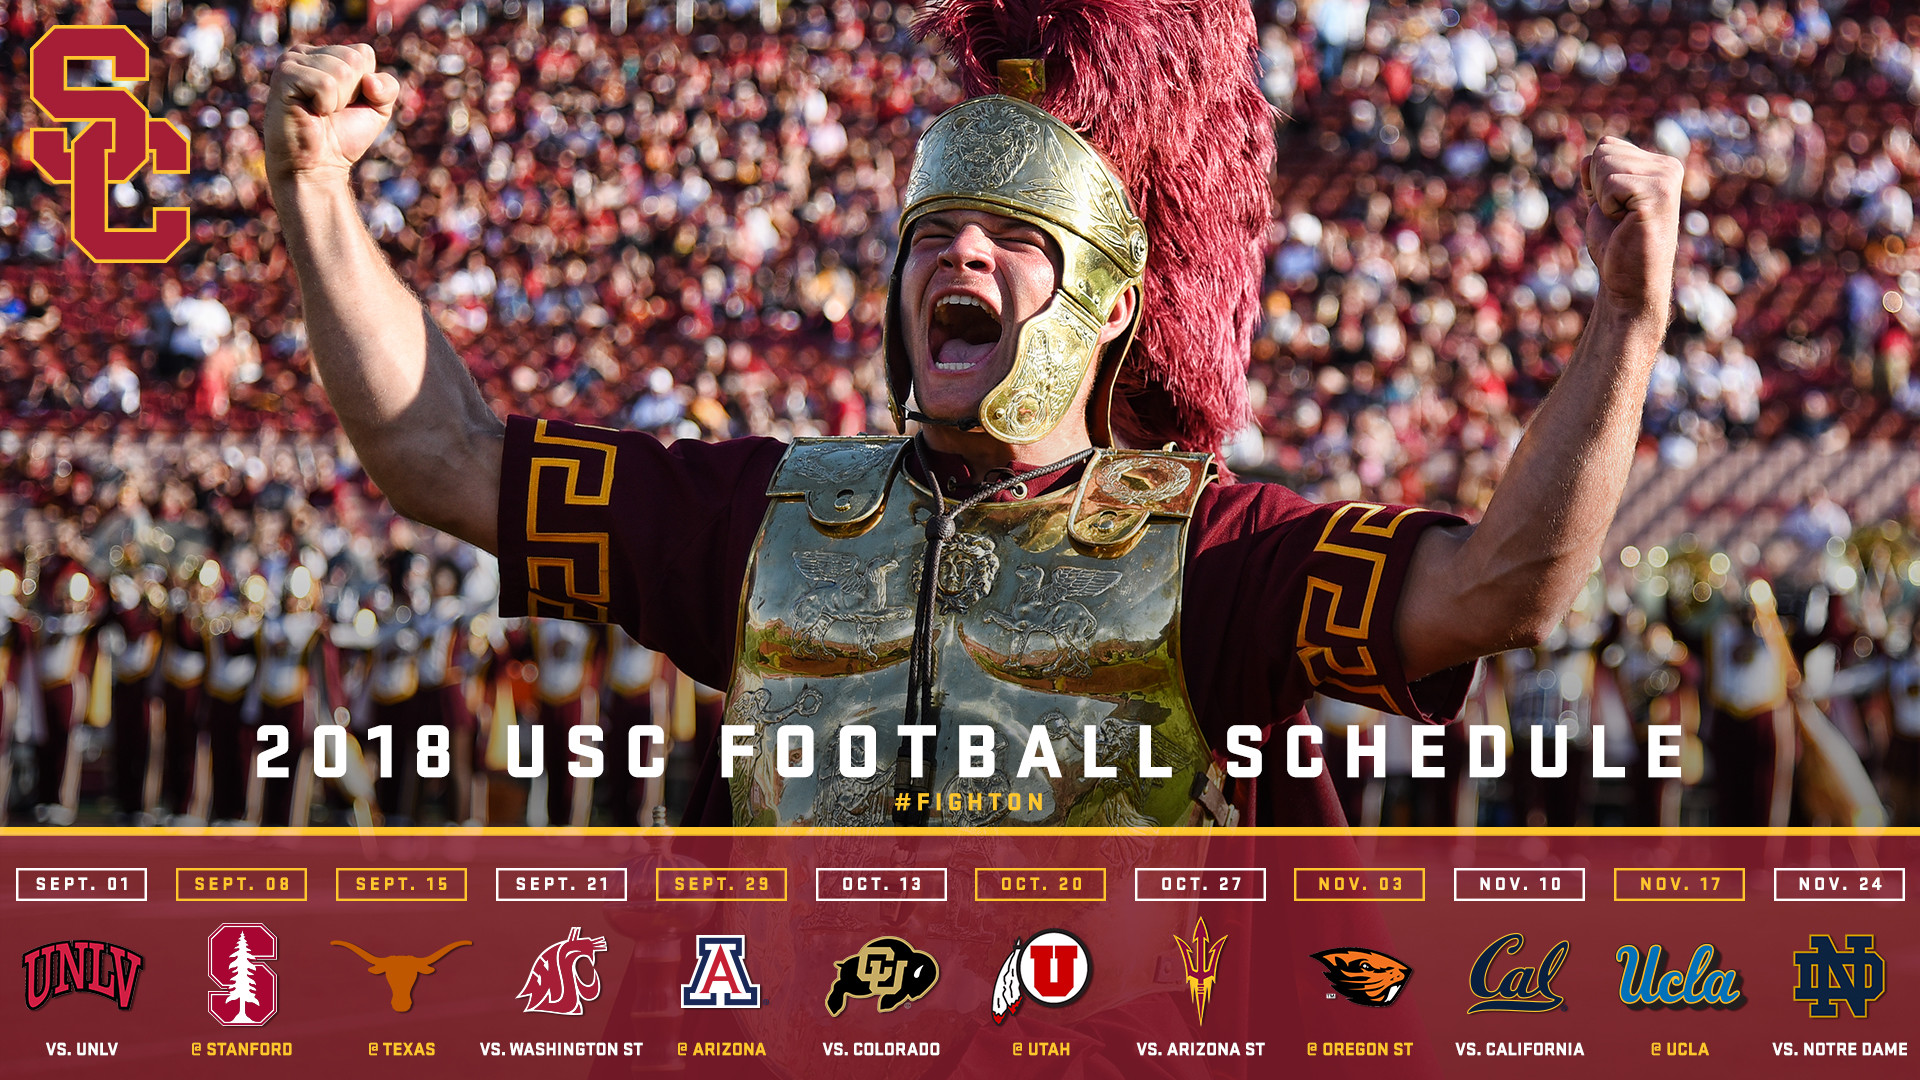 1920x1080 USC's 2018 Football Schedule Announced